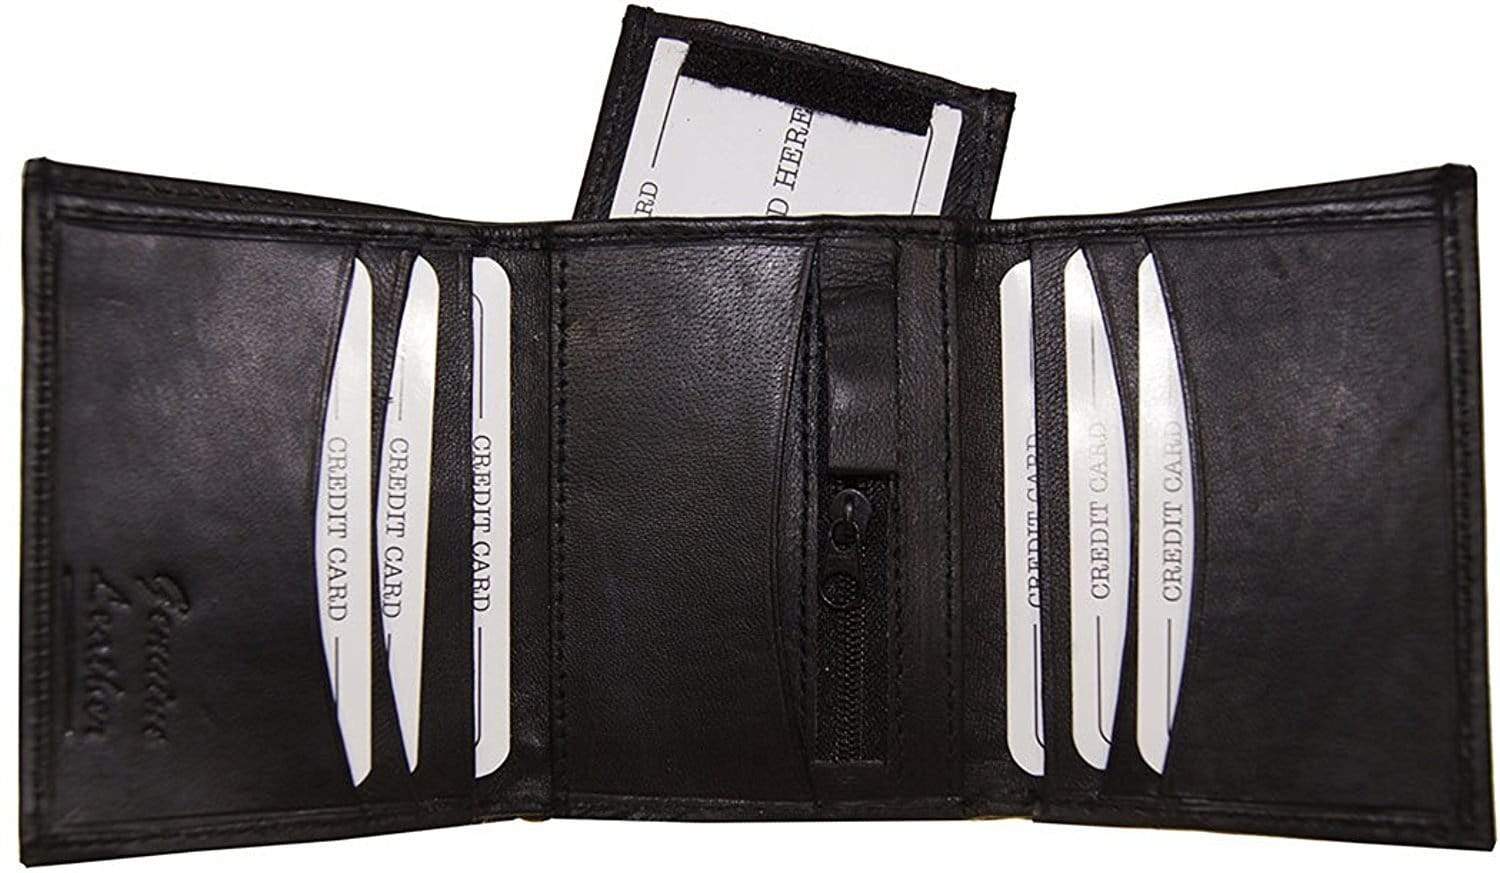 The Leather Shop UK  WOMEN'S BLACK TRIFOLD REAL LEATHER CREDIT CARD HOLDER  WALLET COIN PURSE